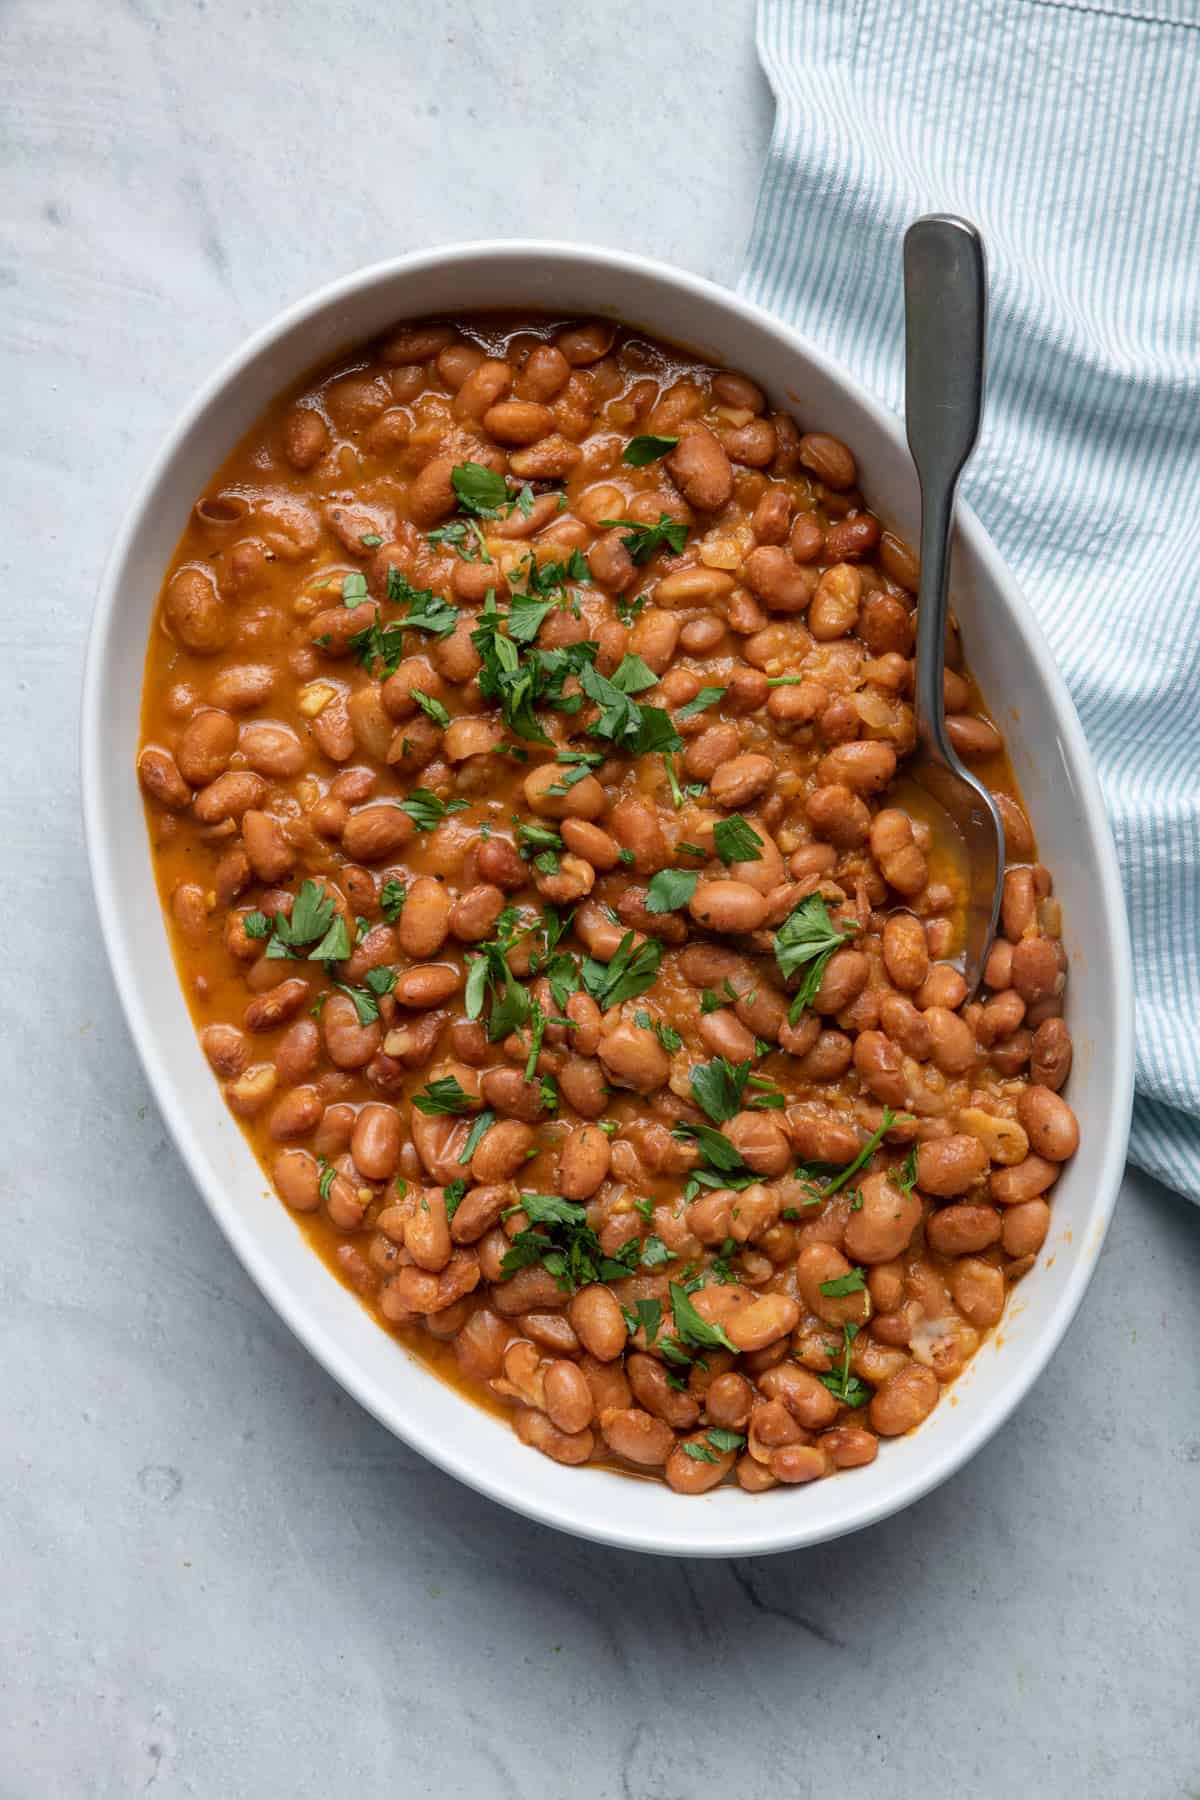 Large dish of instant pot baked beans garnished with parsley